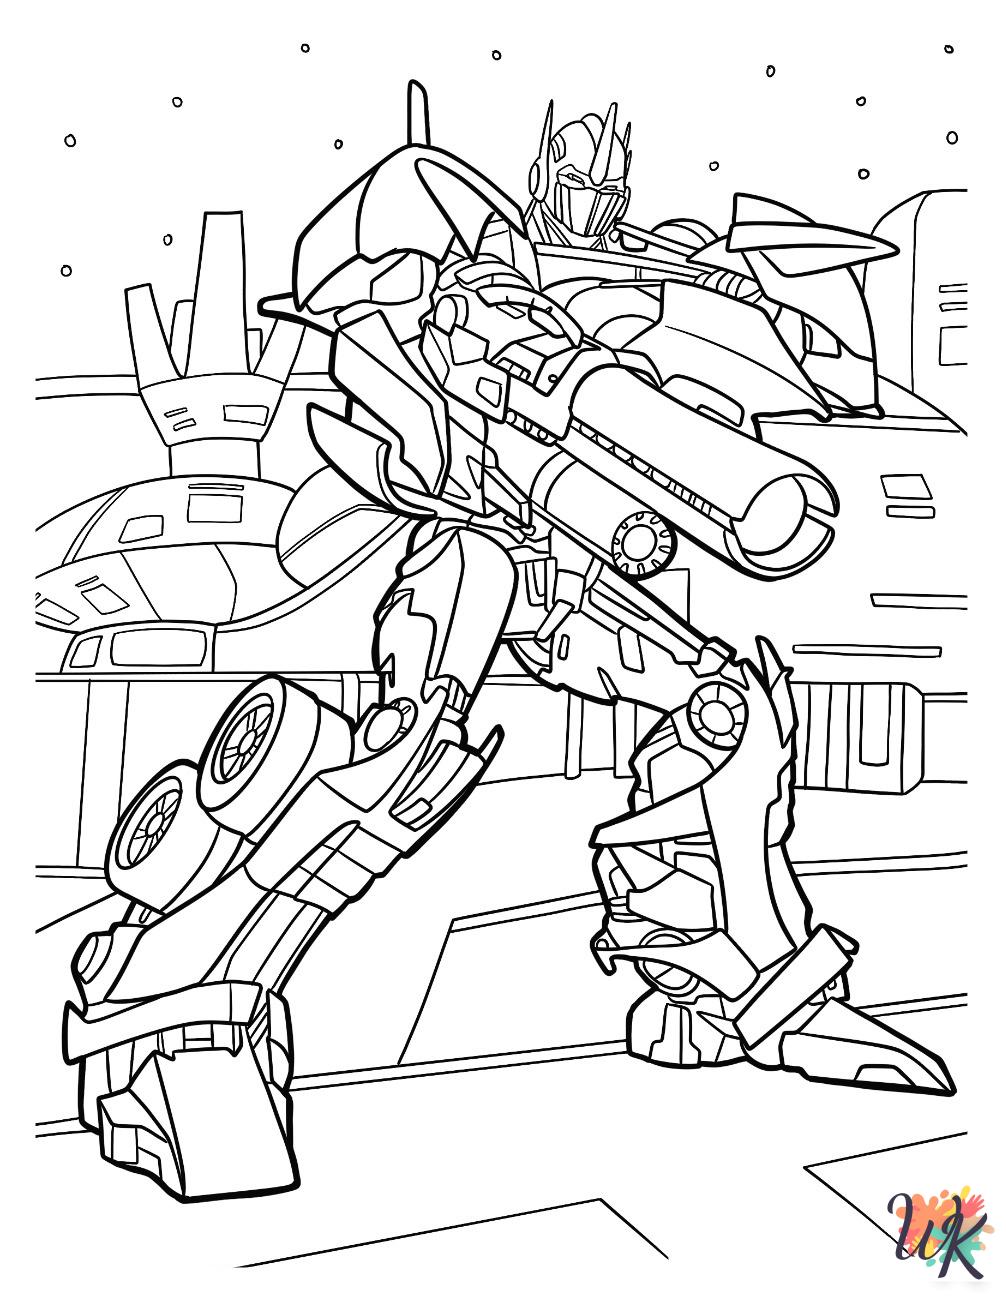 Optimus Prime coloring pages for preschoolers